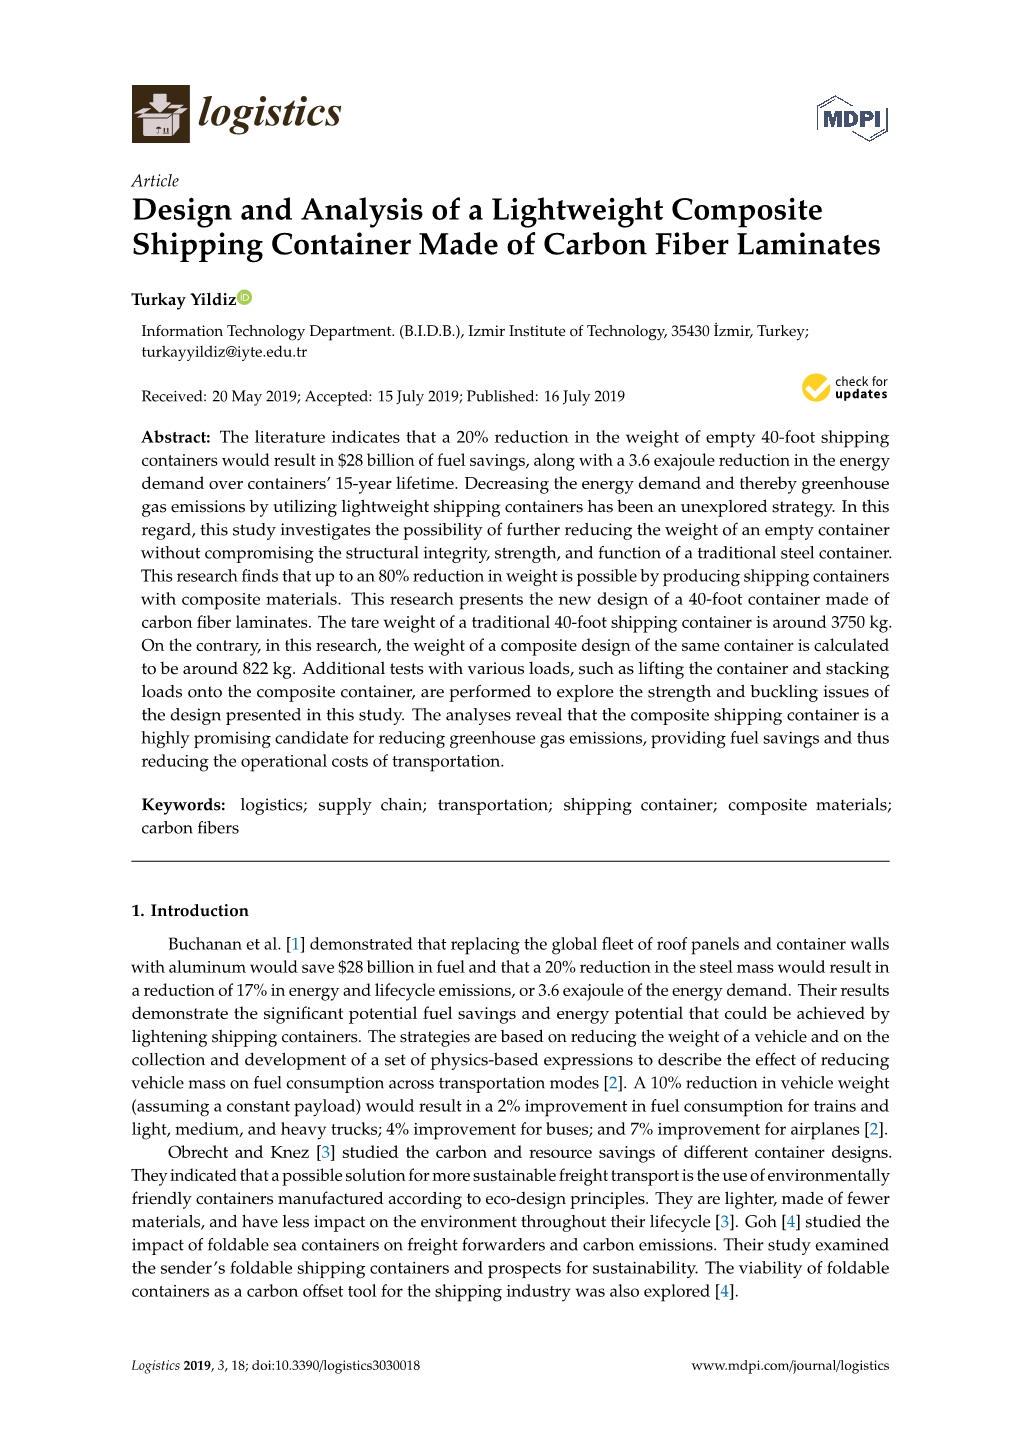 Design and Analysis of a Lightweight Composite Shipping Container Made of Carbon Fiber Laminates